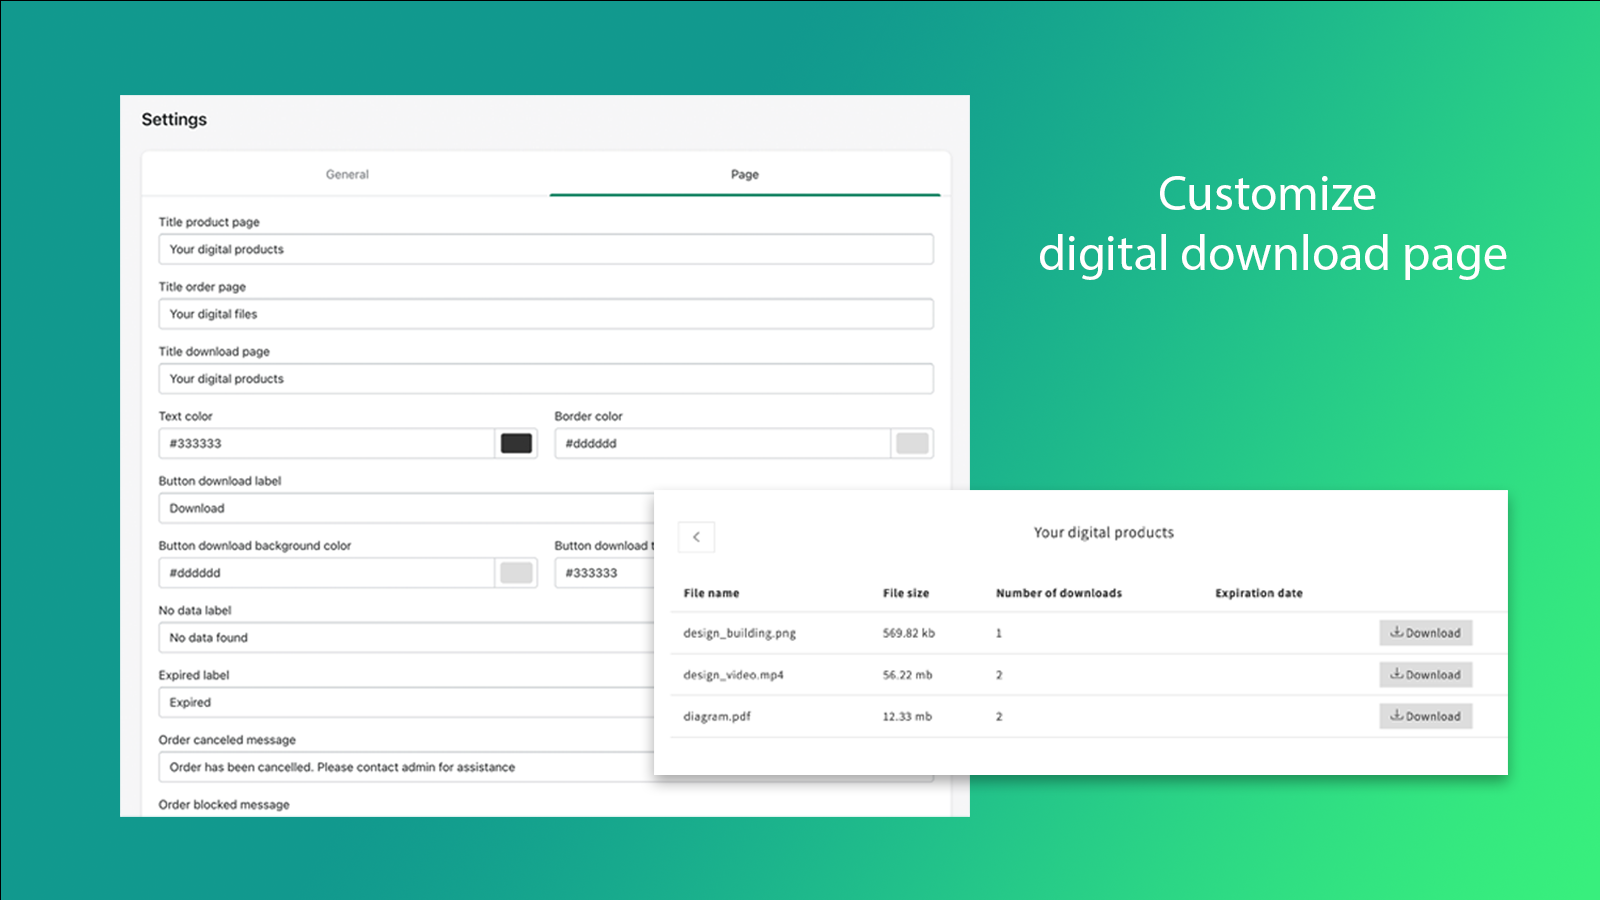 Customize digital download page